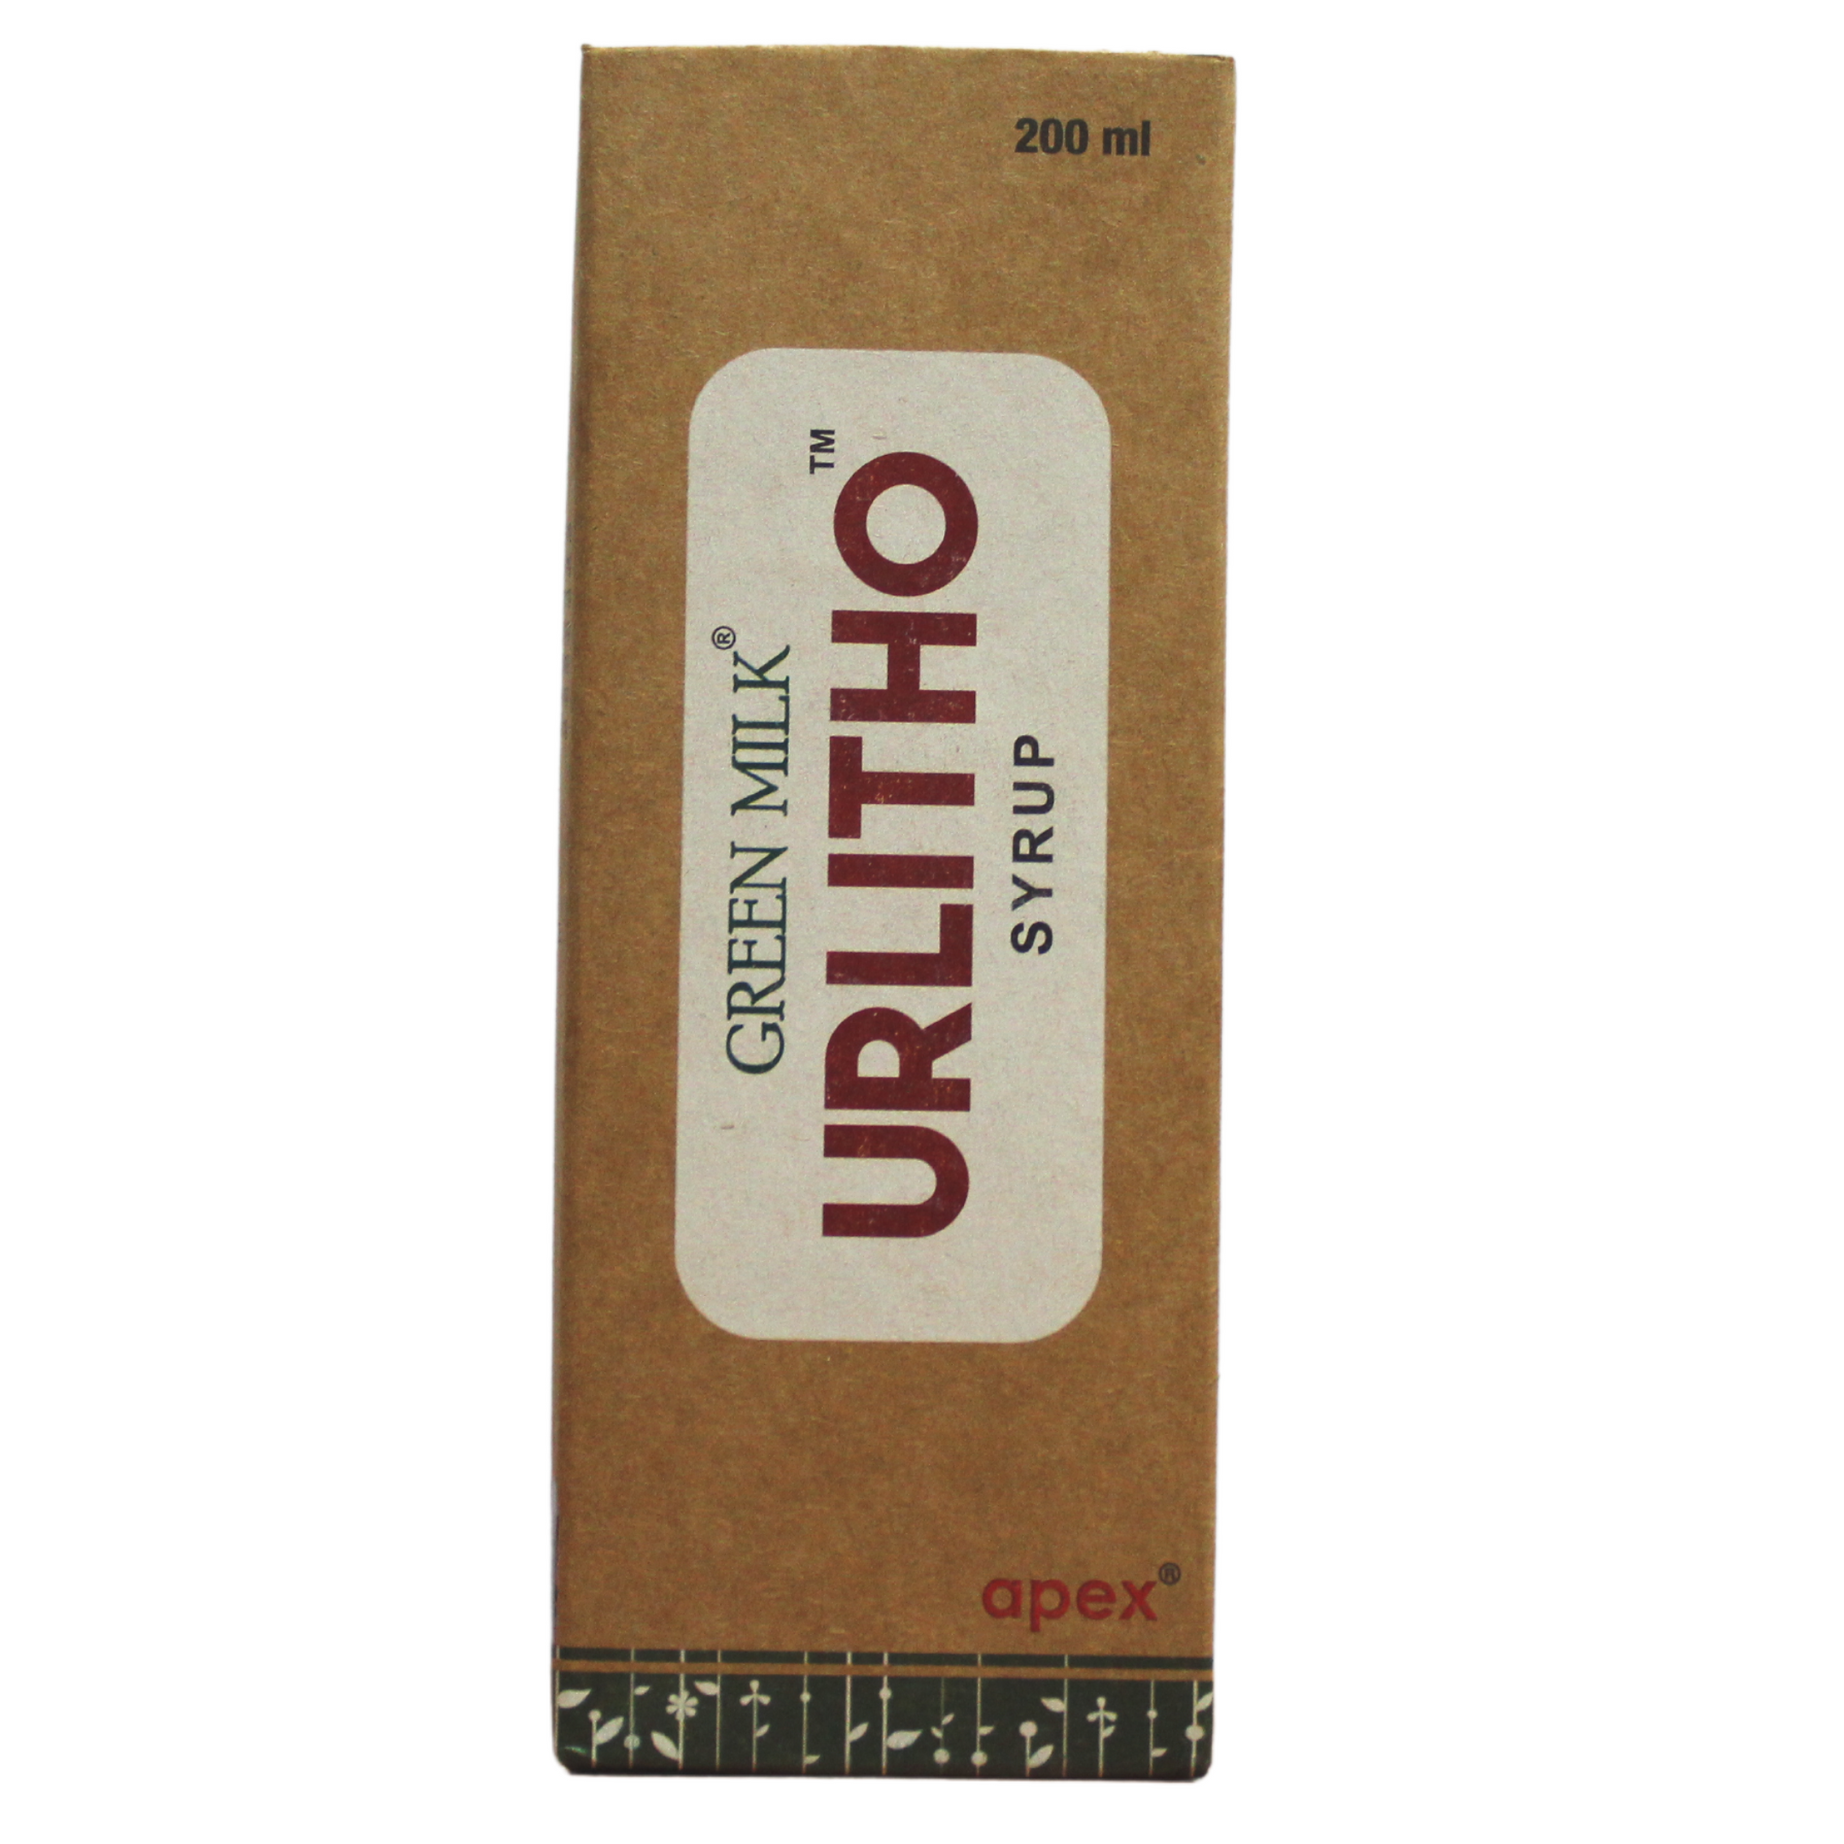 Shop Urlitho syrup 200ml at price 160.00 from Apex Ayurveda Online - Ayush Care